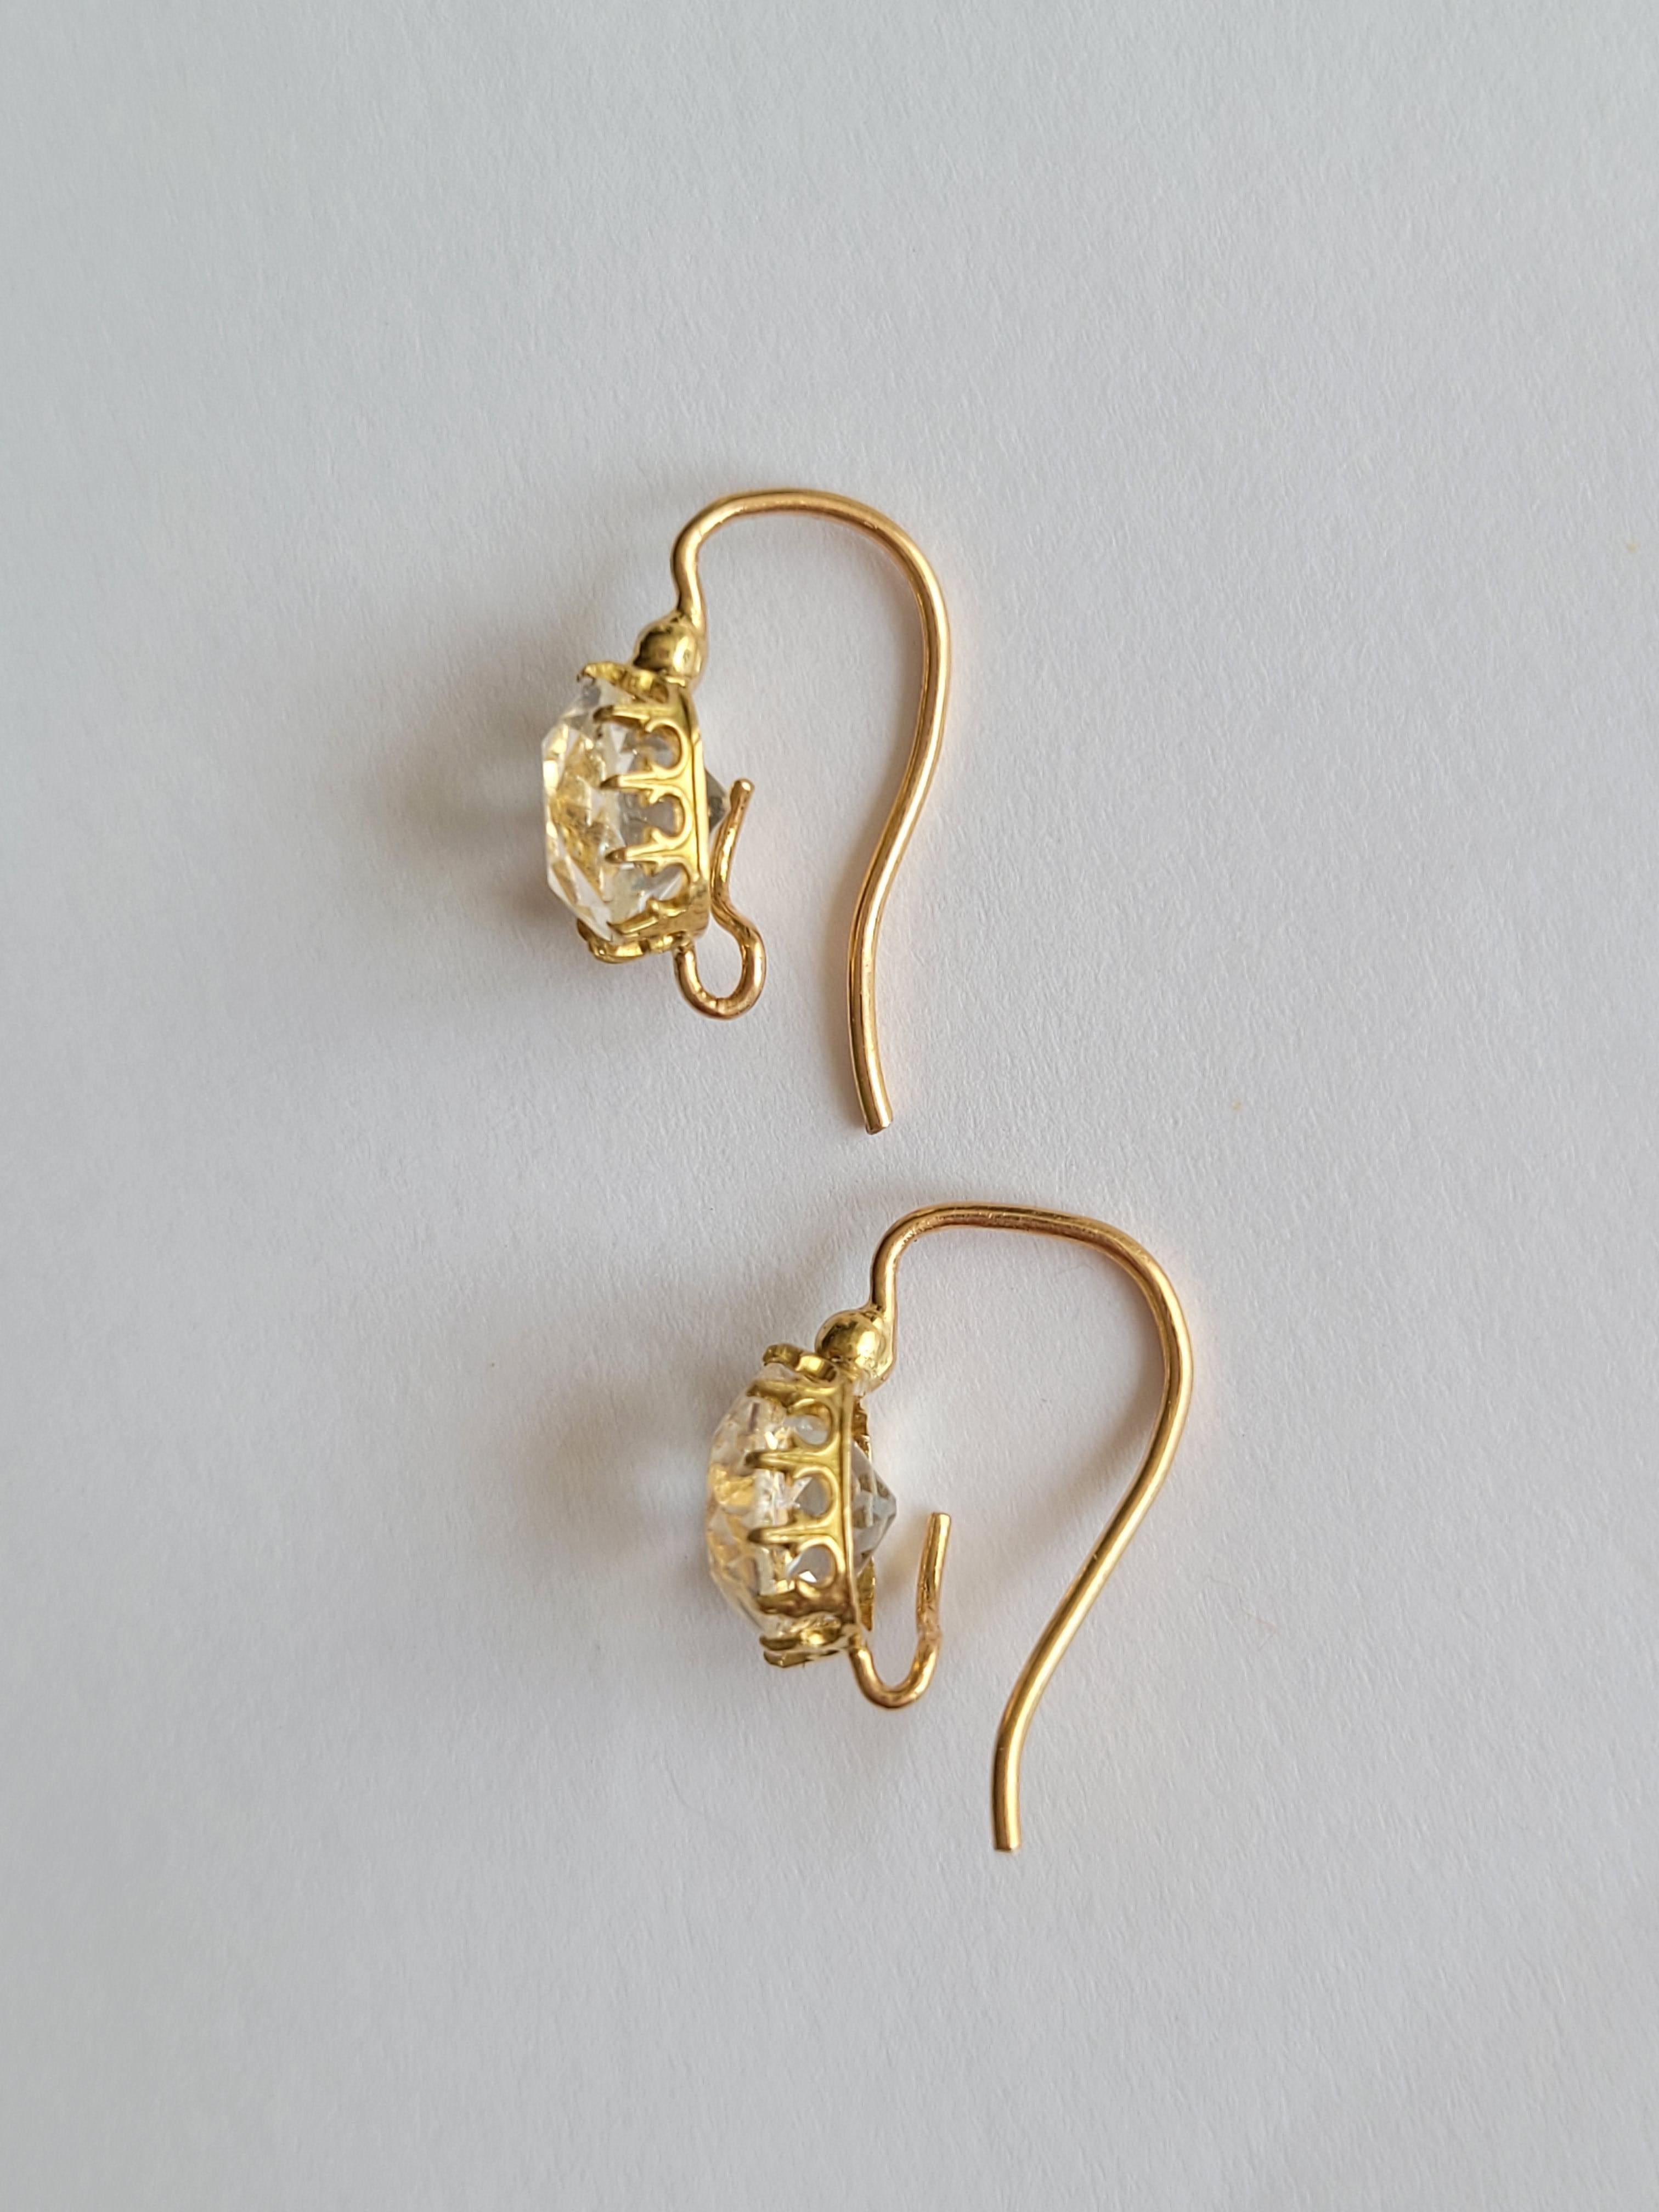 These exquisite late 19th-century earrings showcase a timeless elegance, crafted from lustrous 18-carat gold and adorned with mesmerizing rock crystal stones in a regal crown-style setting. The petite yet impactful design boasts a total drop of 13mm